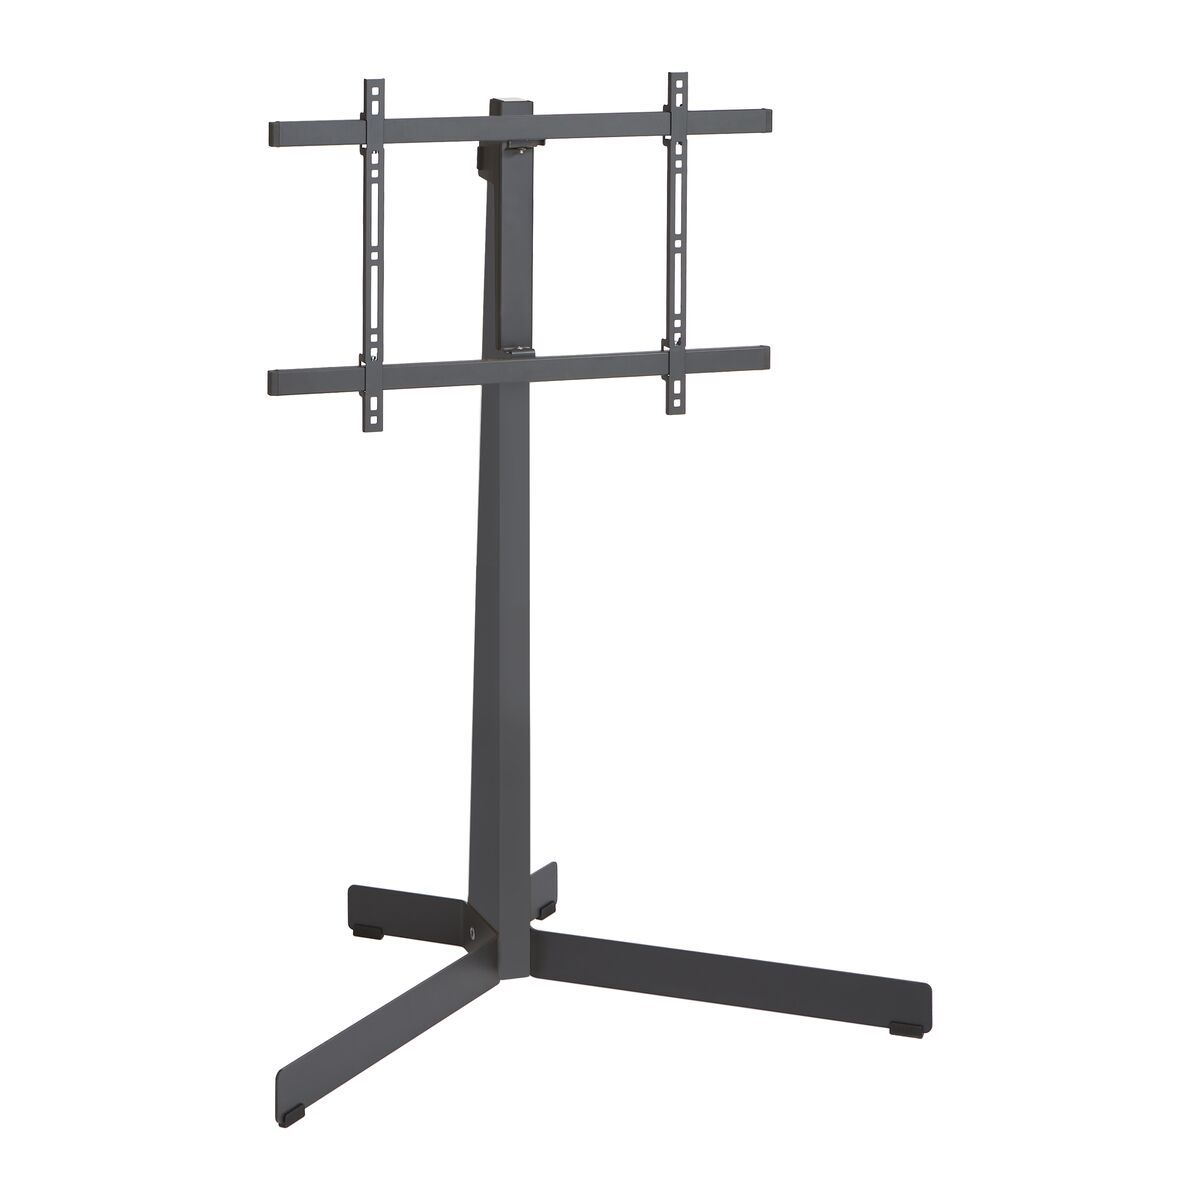 Vogel's TVS 3690 TV Floor Stand (black) - Suitable for 40 up to 77 inch TVs up to Product